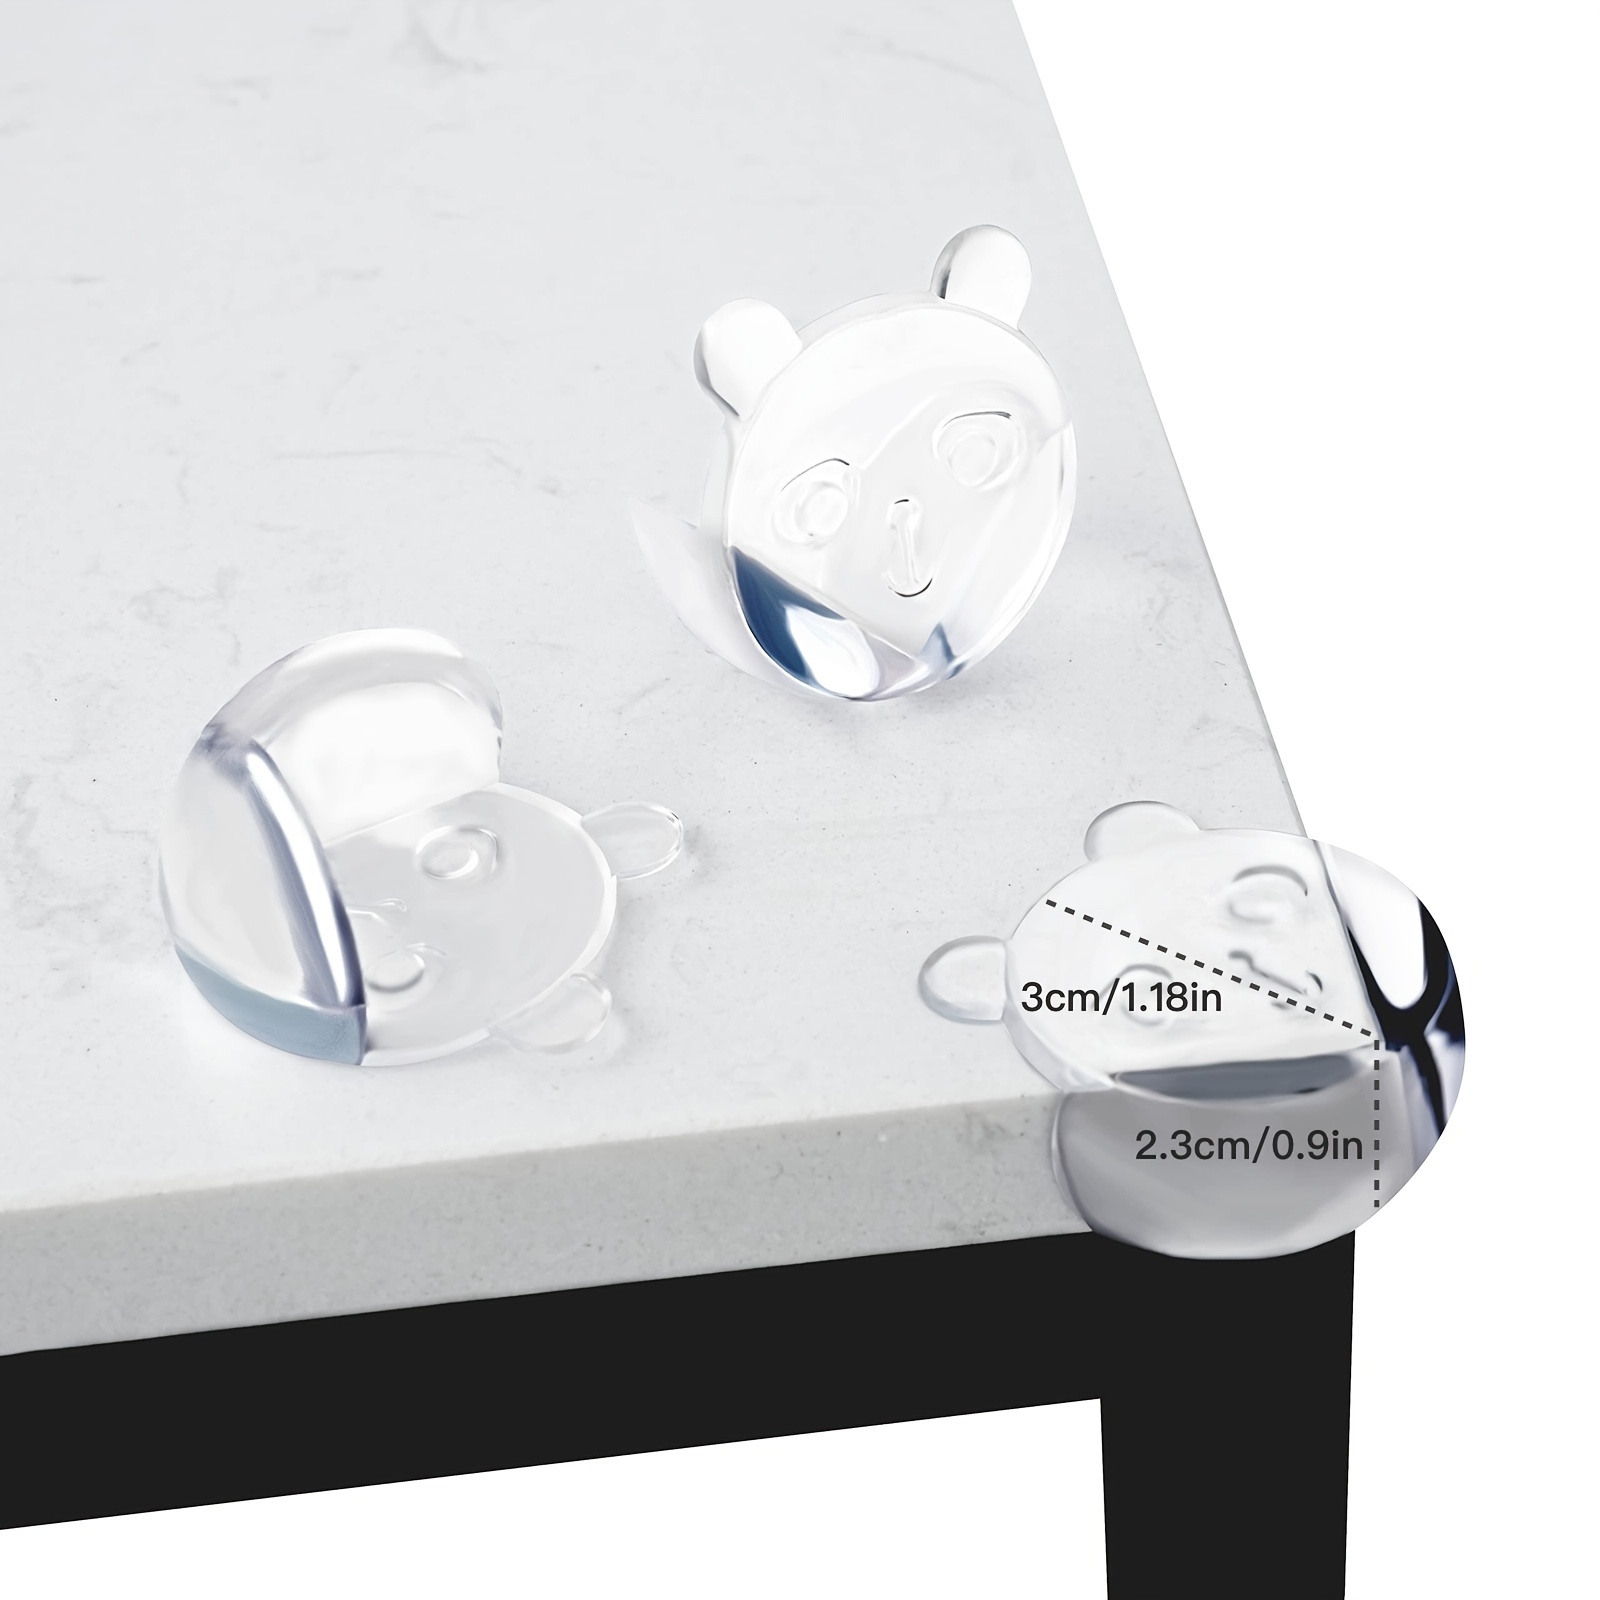 Transparent Child Safety Table Corner and Edge Guard - 5/10/12Pcs